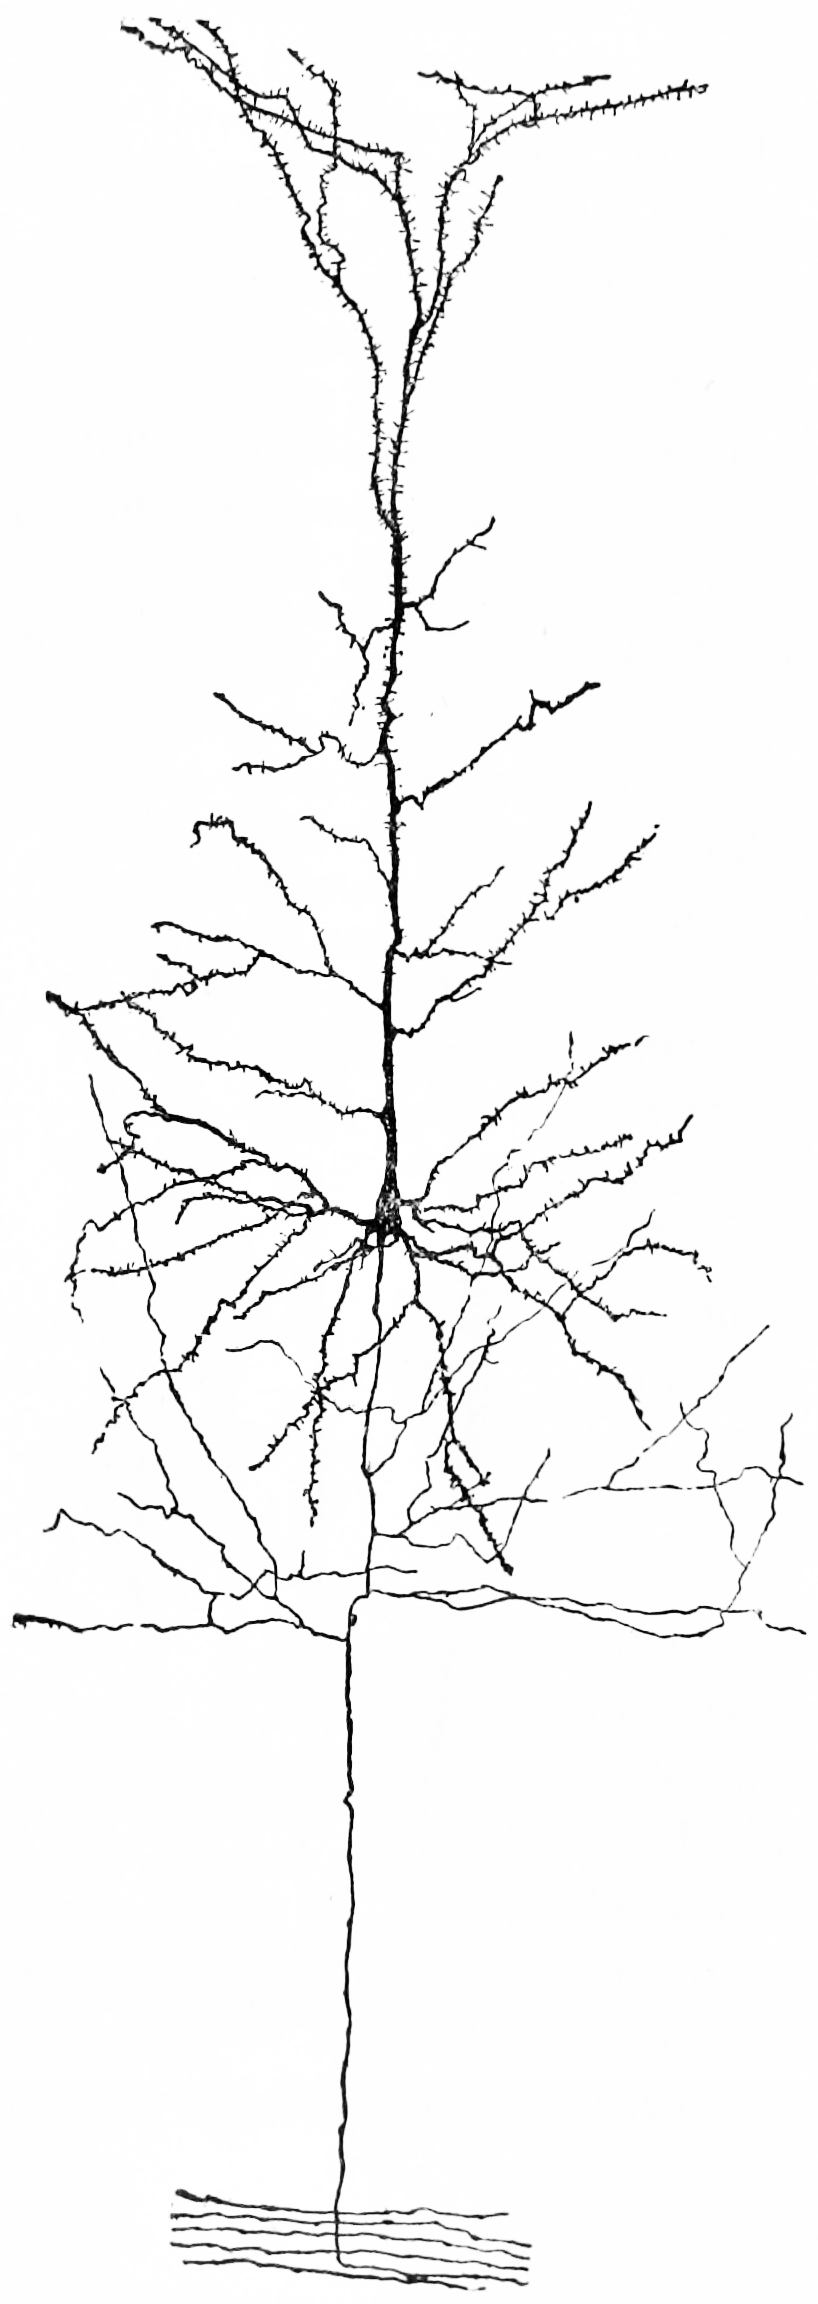 A nerve cell from the cerebral cortex of a rabbit. Notice the extensive tree of dendrites at the top, the long axon at the bottom. Because of the pyramid-like shape of the cell body, this type of neuron is referred to as a pyramidal cell.